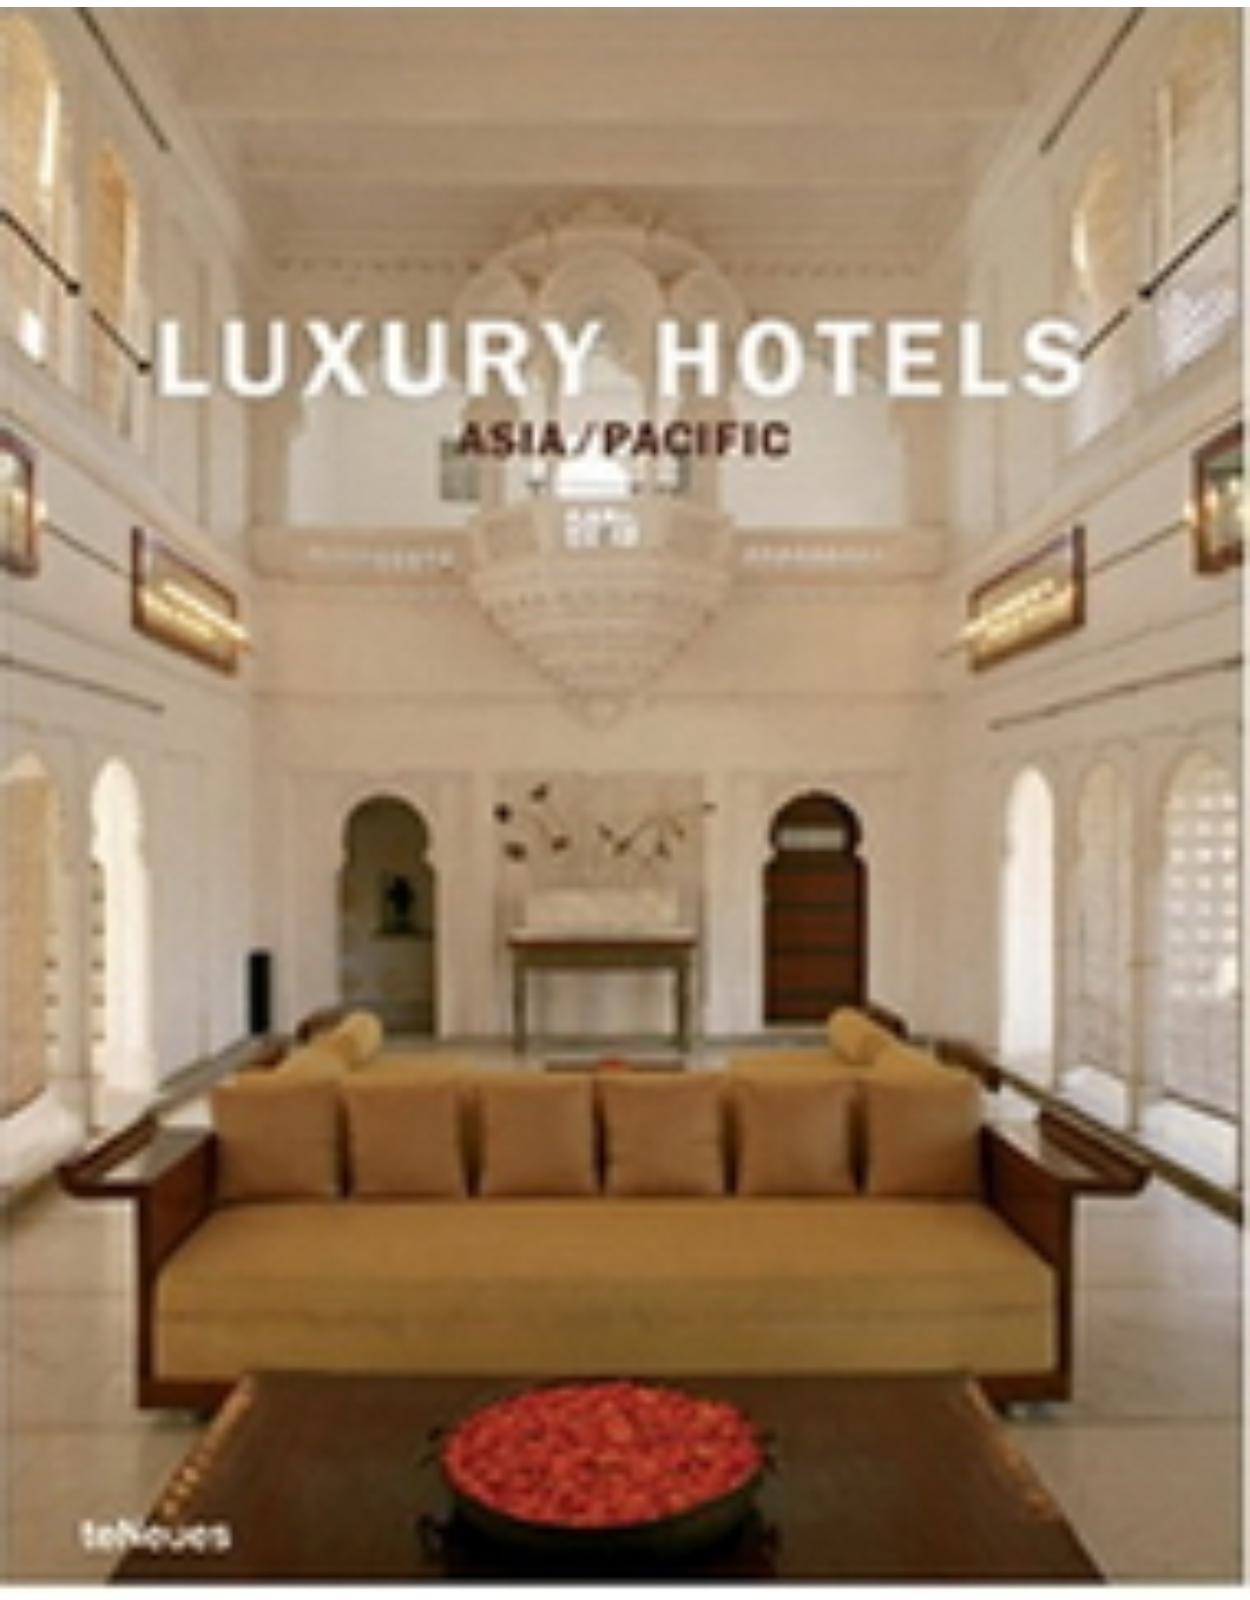 Luxury Hotels Asia/Pacific